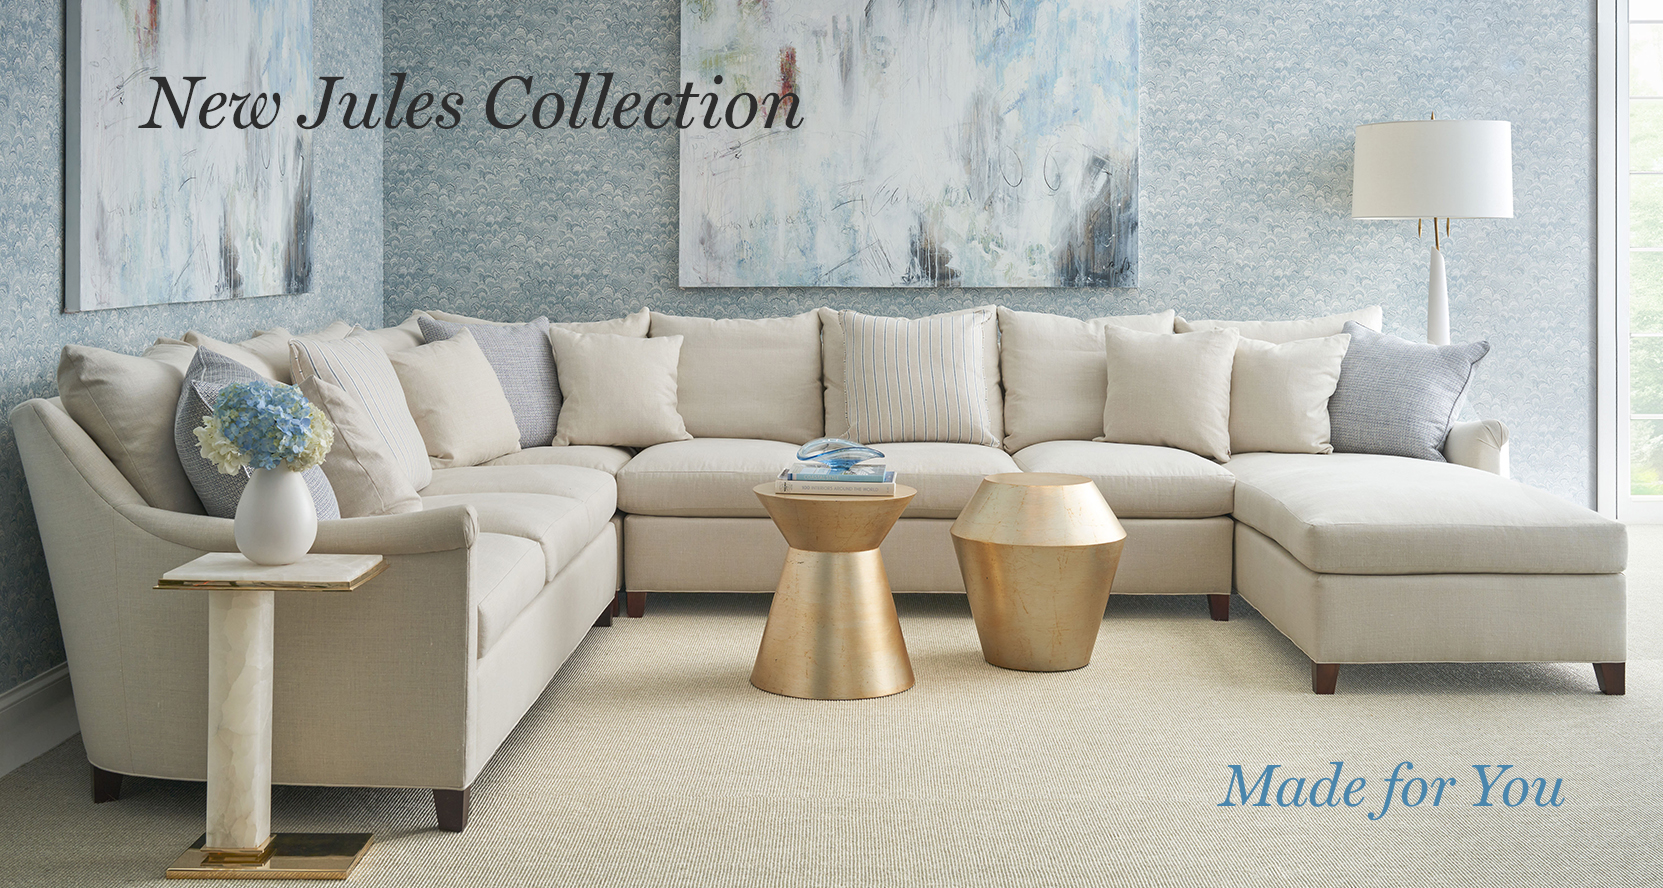 Free Fall and Tailored Furniture Collection